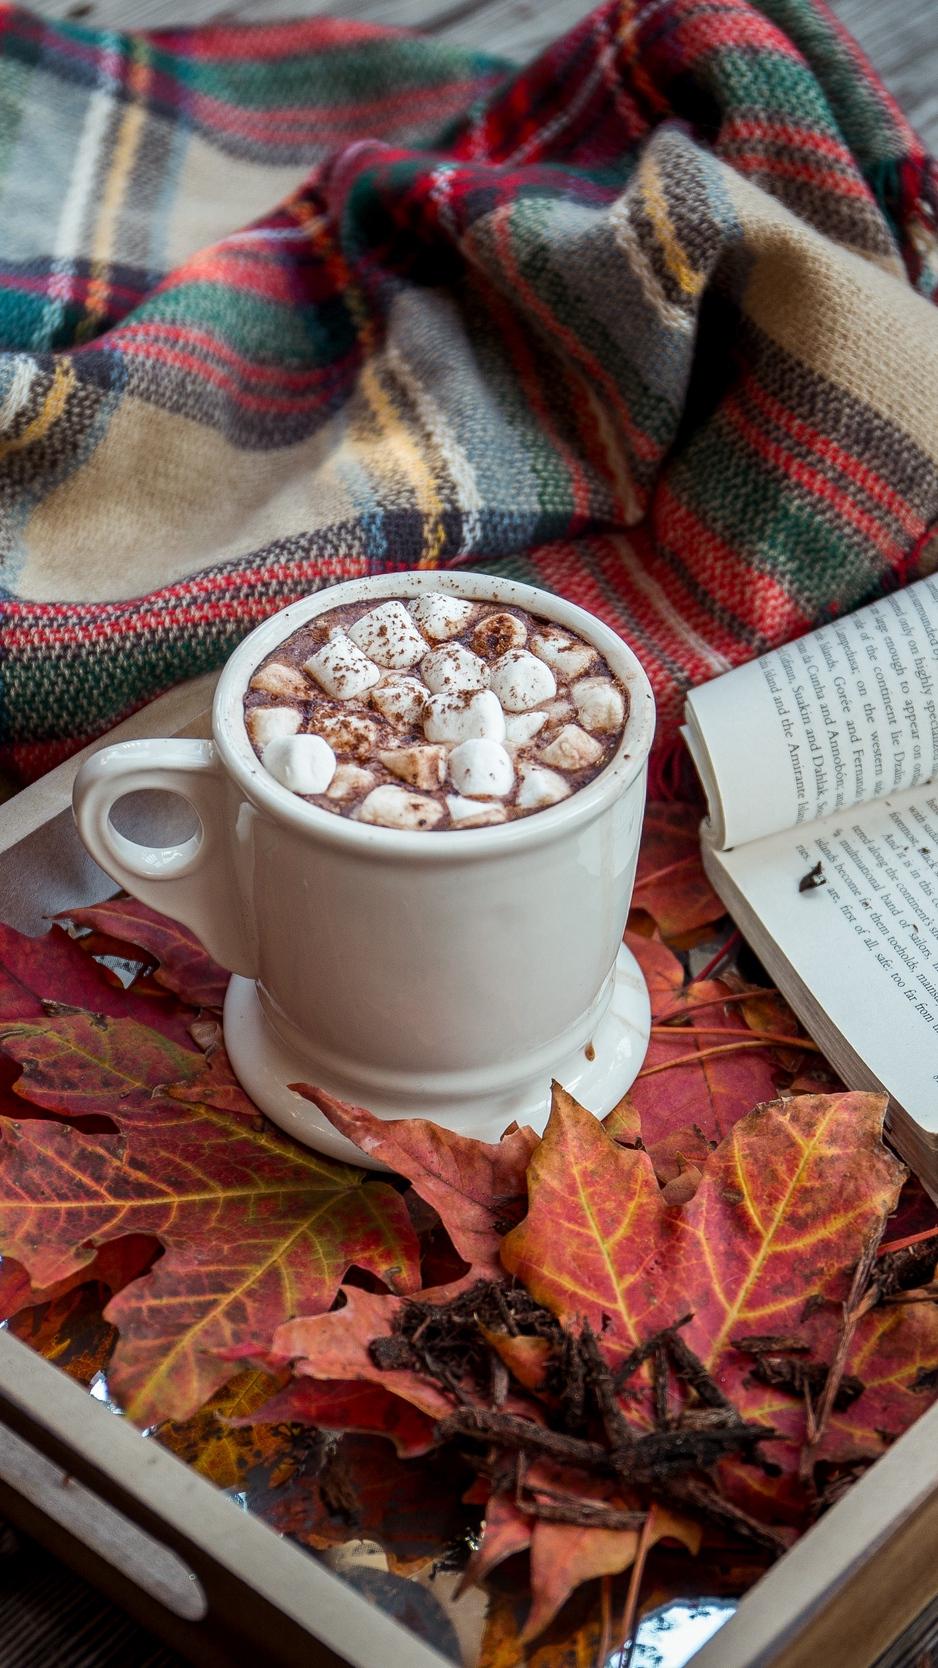 Download Wallpaper 938x1668 Cocoa, Marshmallow, Plaid, Book, Autumn Iphone 8 7 6s 6 For Parallax HD Background